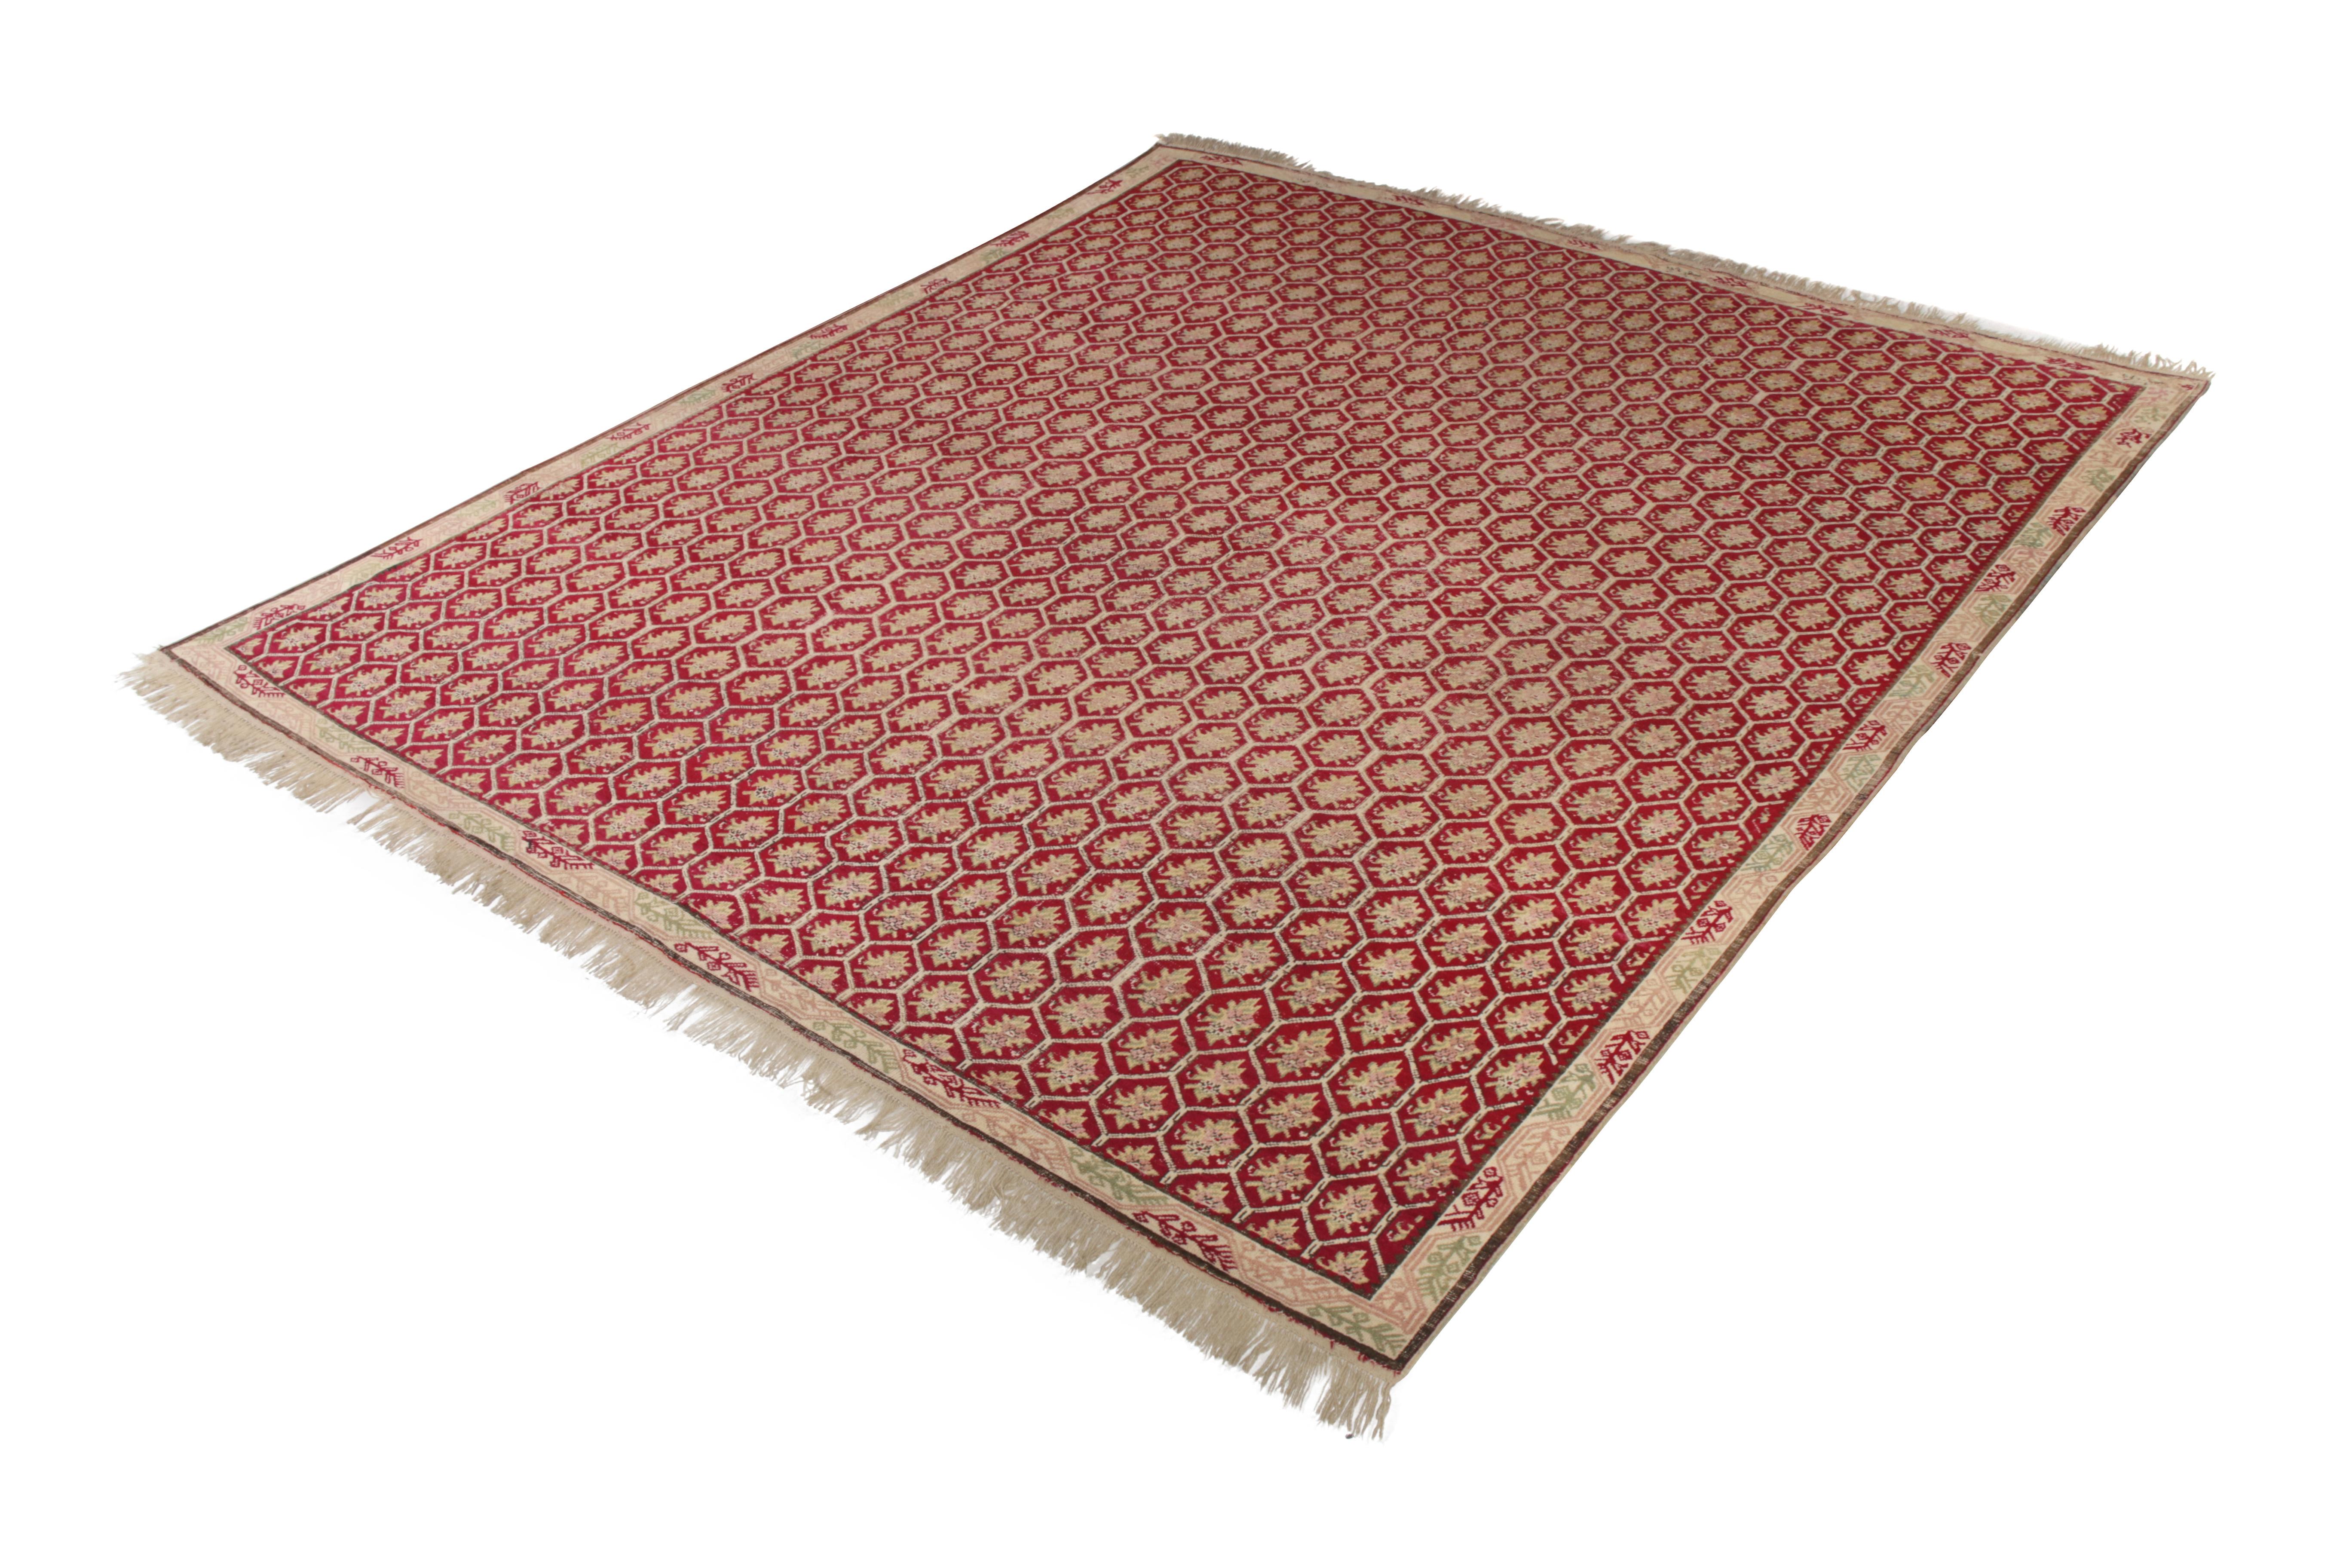 An 11 x 13 antique Kilim rug in red and beige, originating from Turkey circa 1920-1930. This handwoven wool Kilim is hails from distinctive, excellent small print antique Turkish rugs with several celebrated decorative qualities.

On the design: